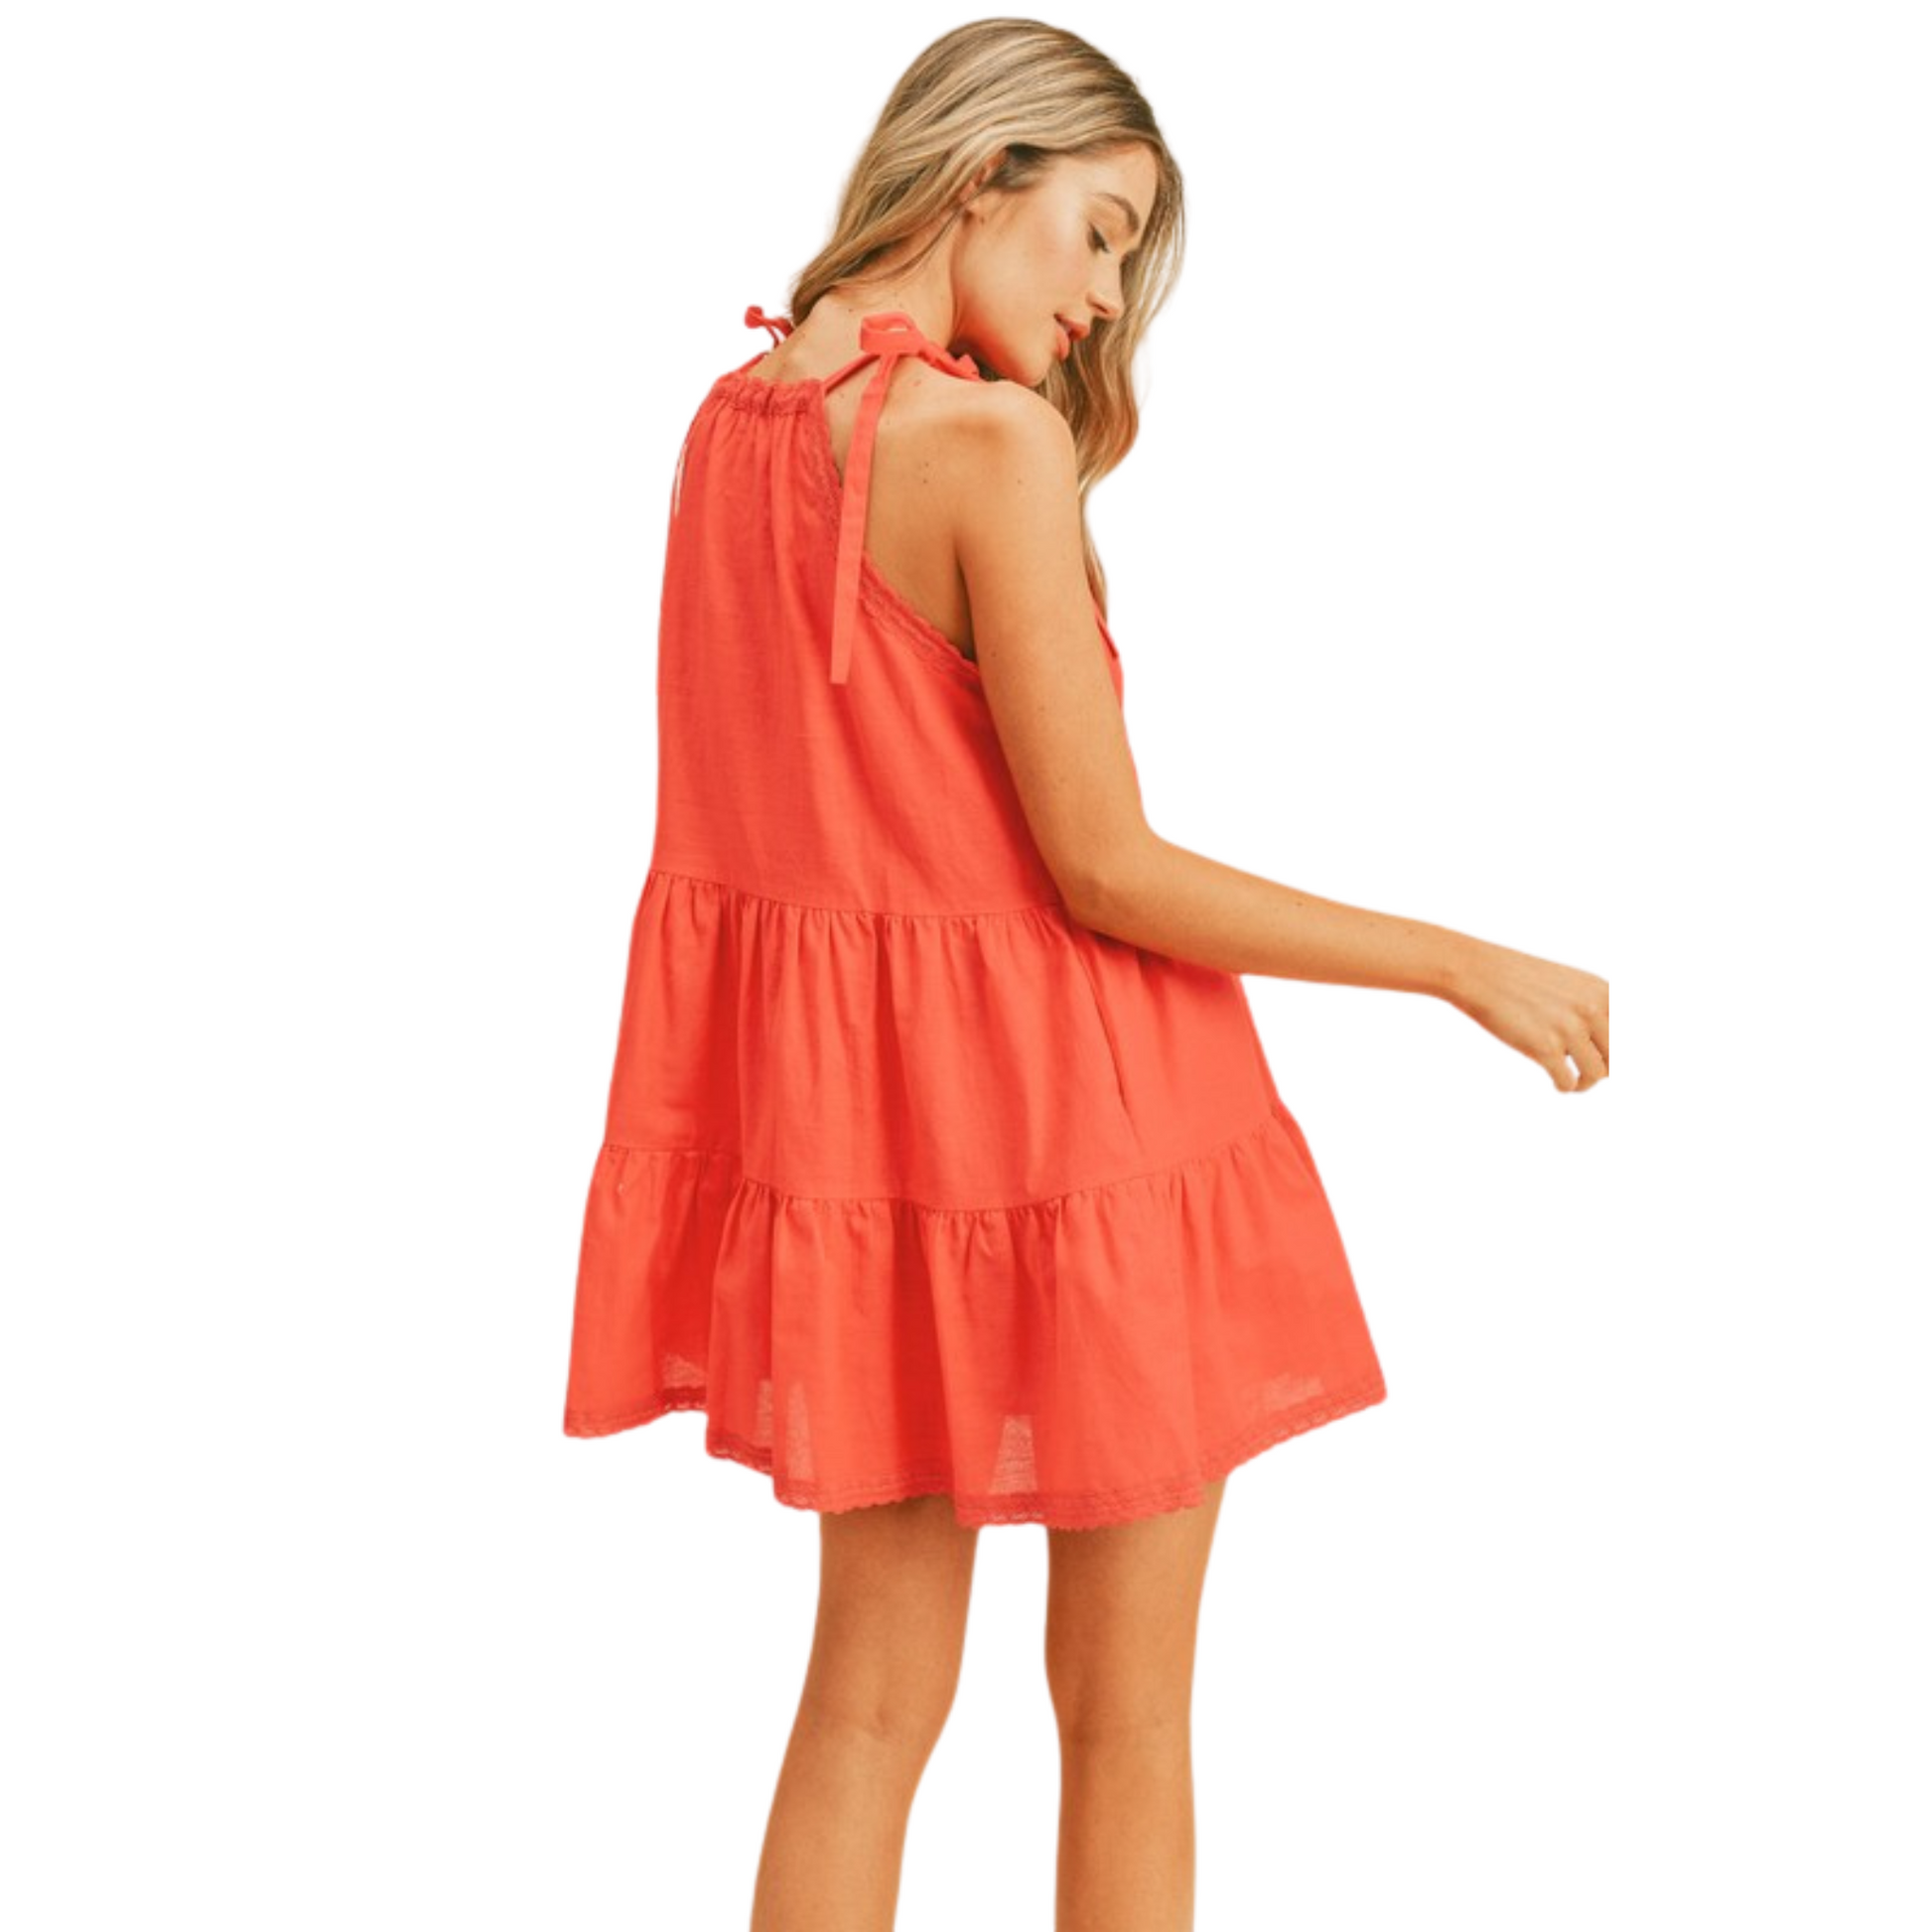 Experience ultimate comfort and style with our Halter Babydoll Dress. This mini dress features a flattering halter neckline with delicate lace trim and adjustable straps for a perfect fit. The tiered seams and pockets add a touch of convenience while the bright red color makes a bold statement. Stay cool and chic with its lined design.